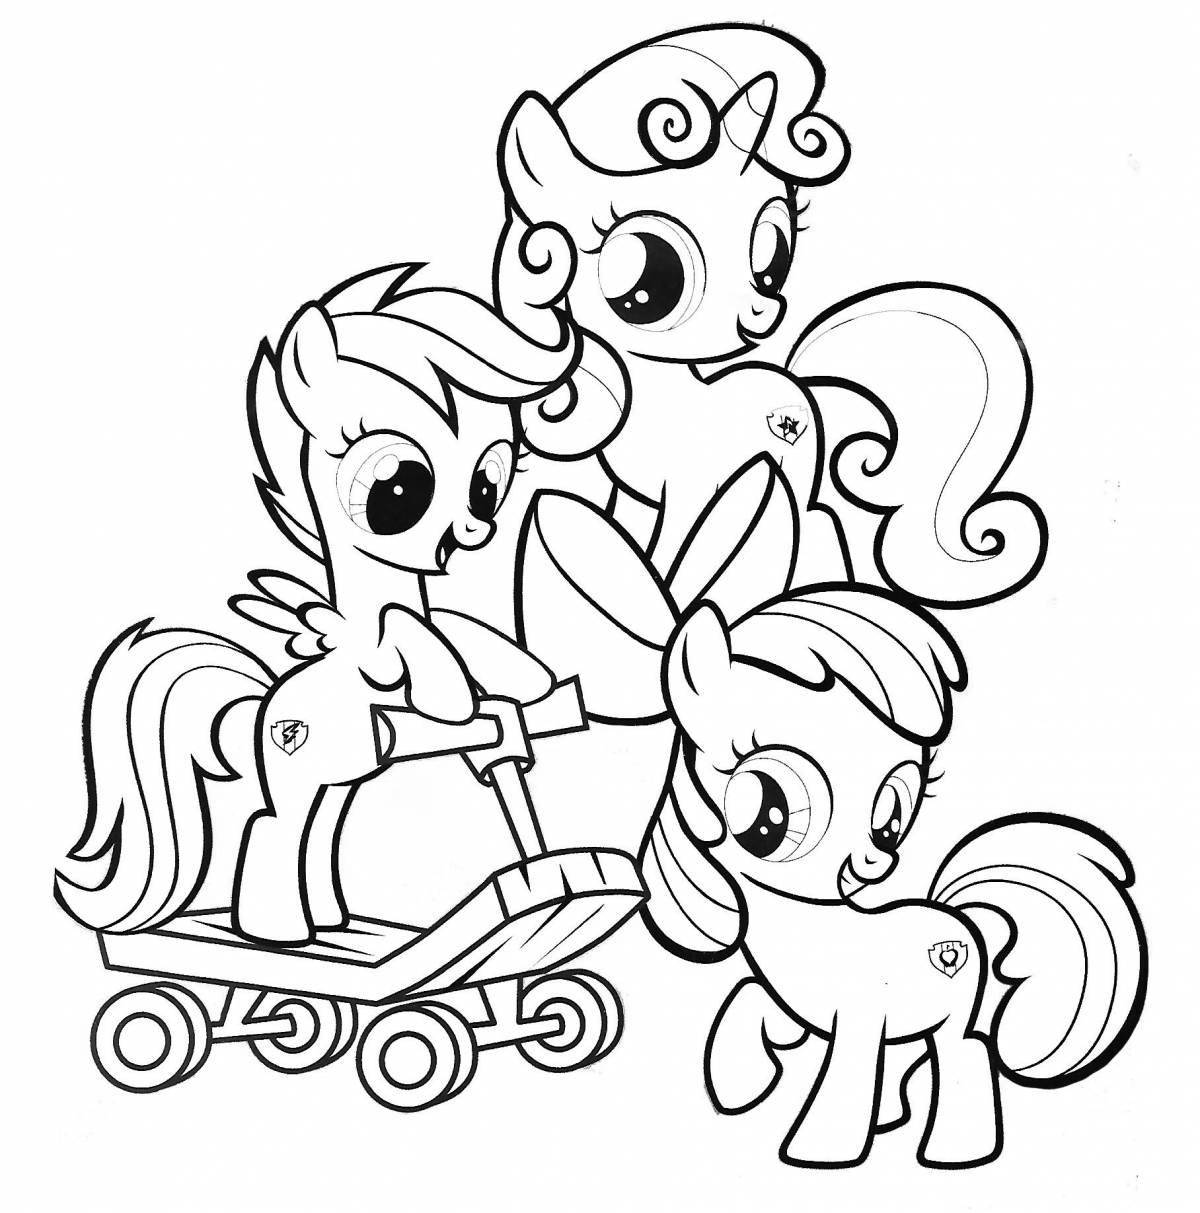 My little pony coloring book #2